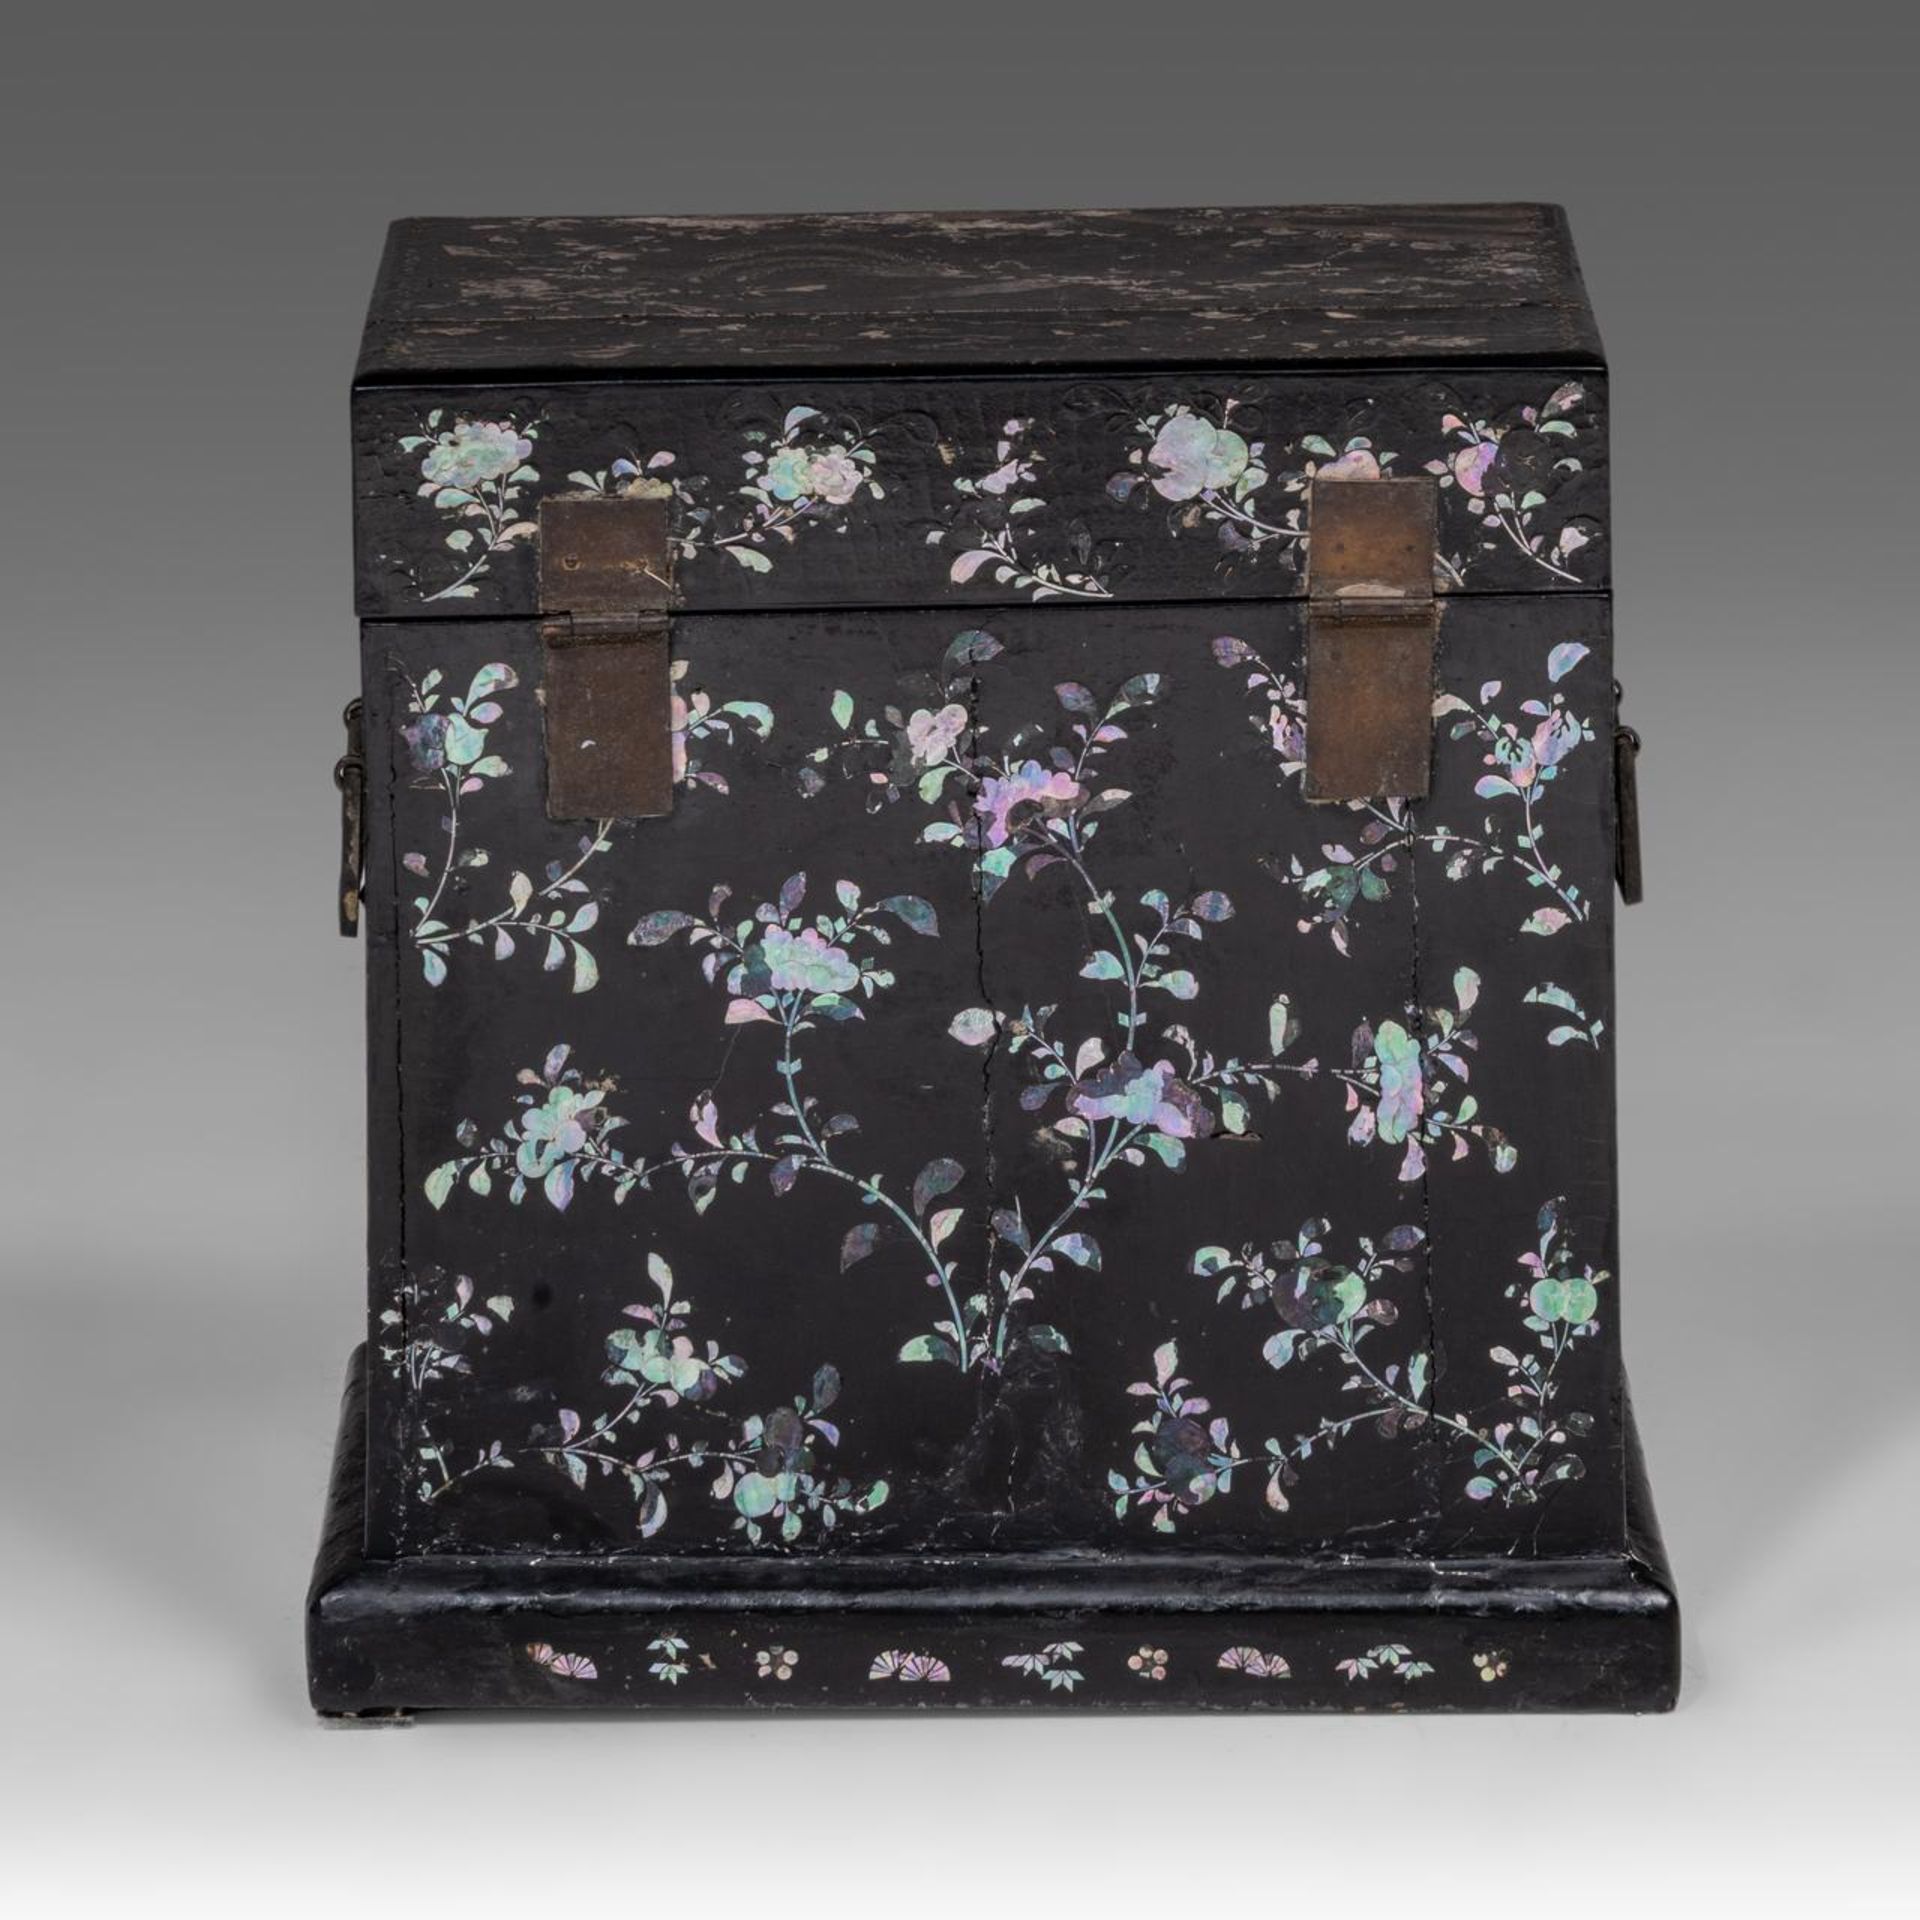 A Chinese lac burgaute travelling writing box or table cabinet, 17thC/18thC, H 31 - 28,5 x 21 cm - Image 6 of 7